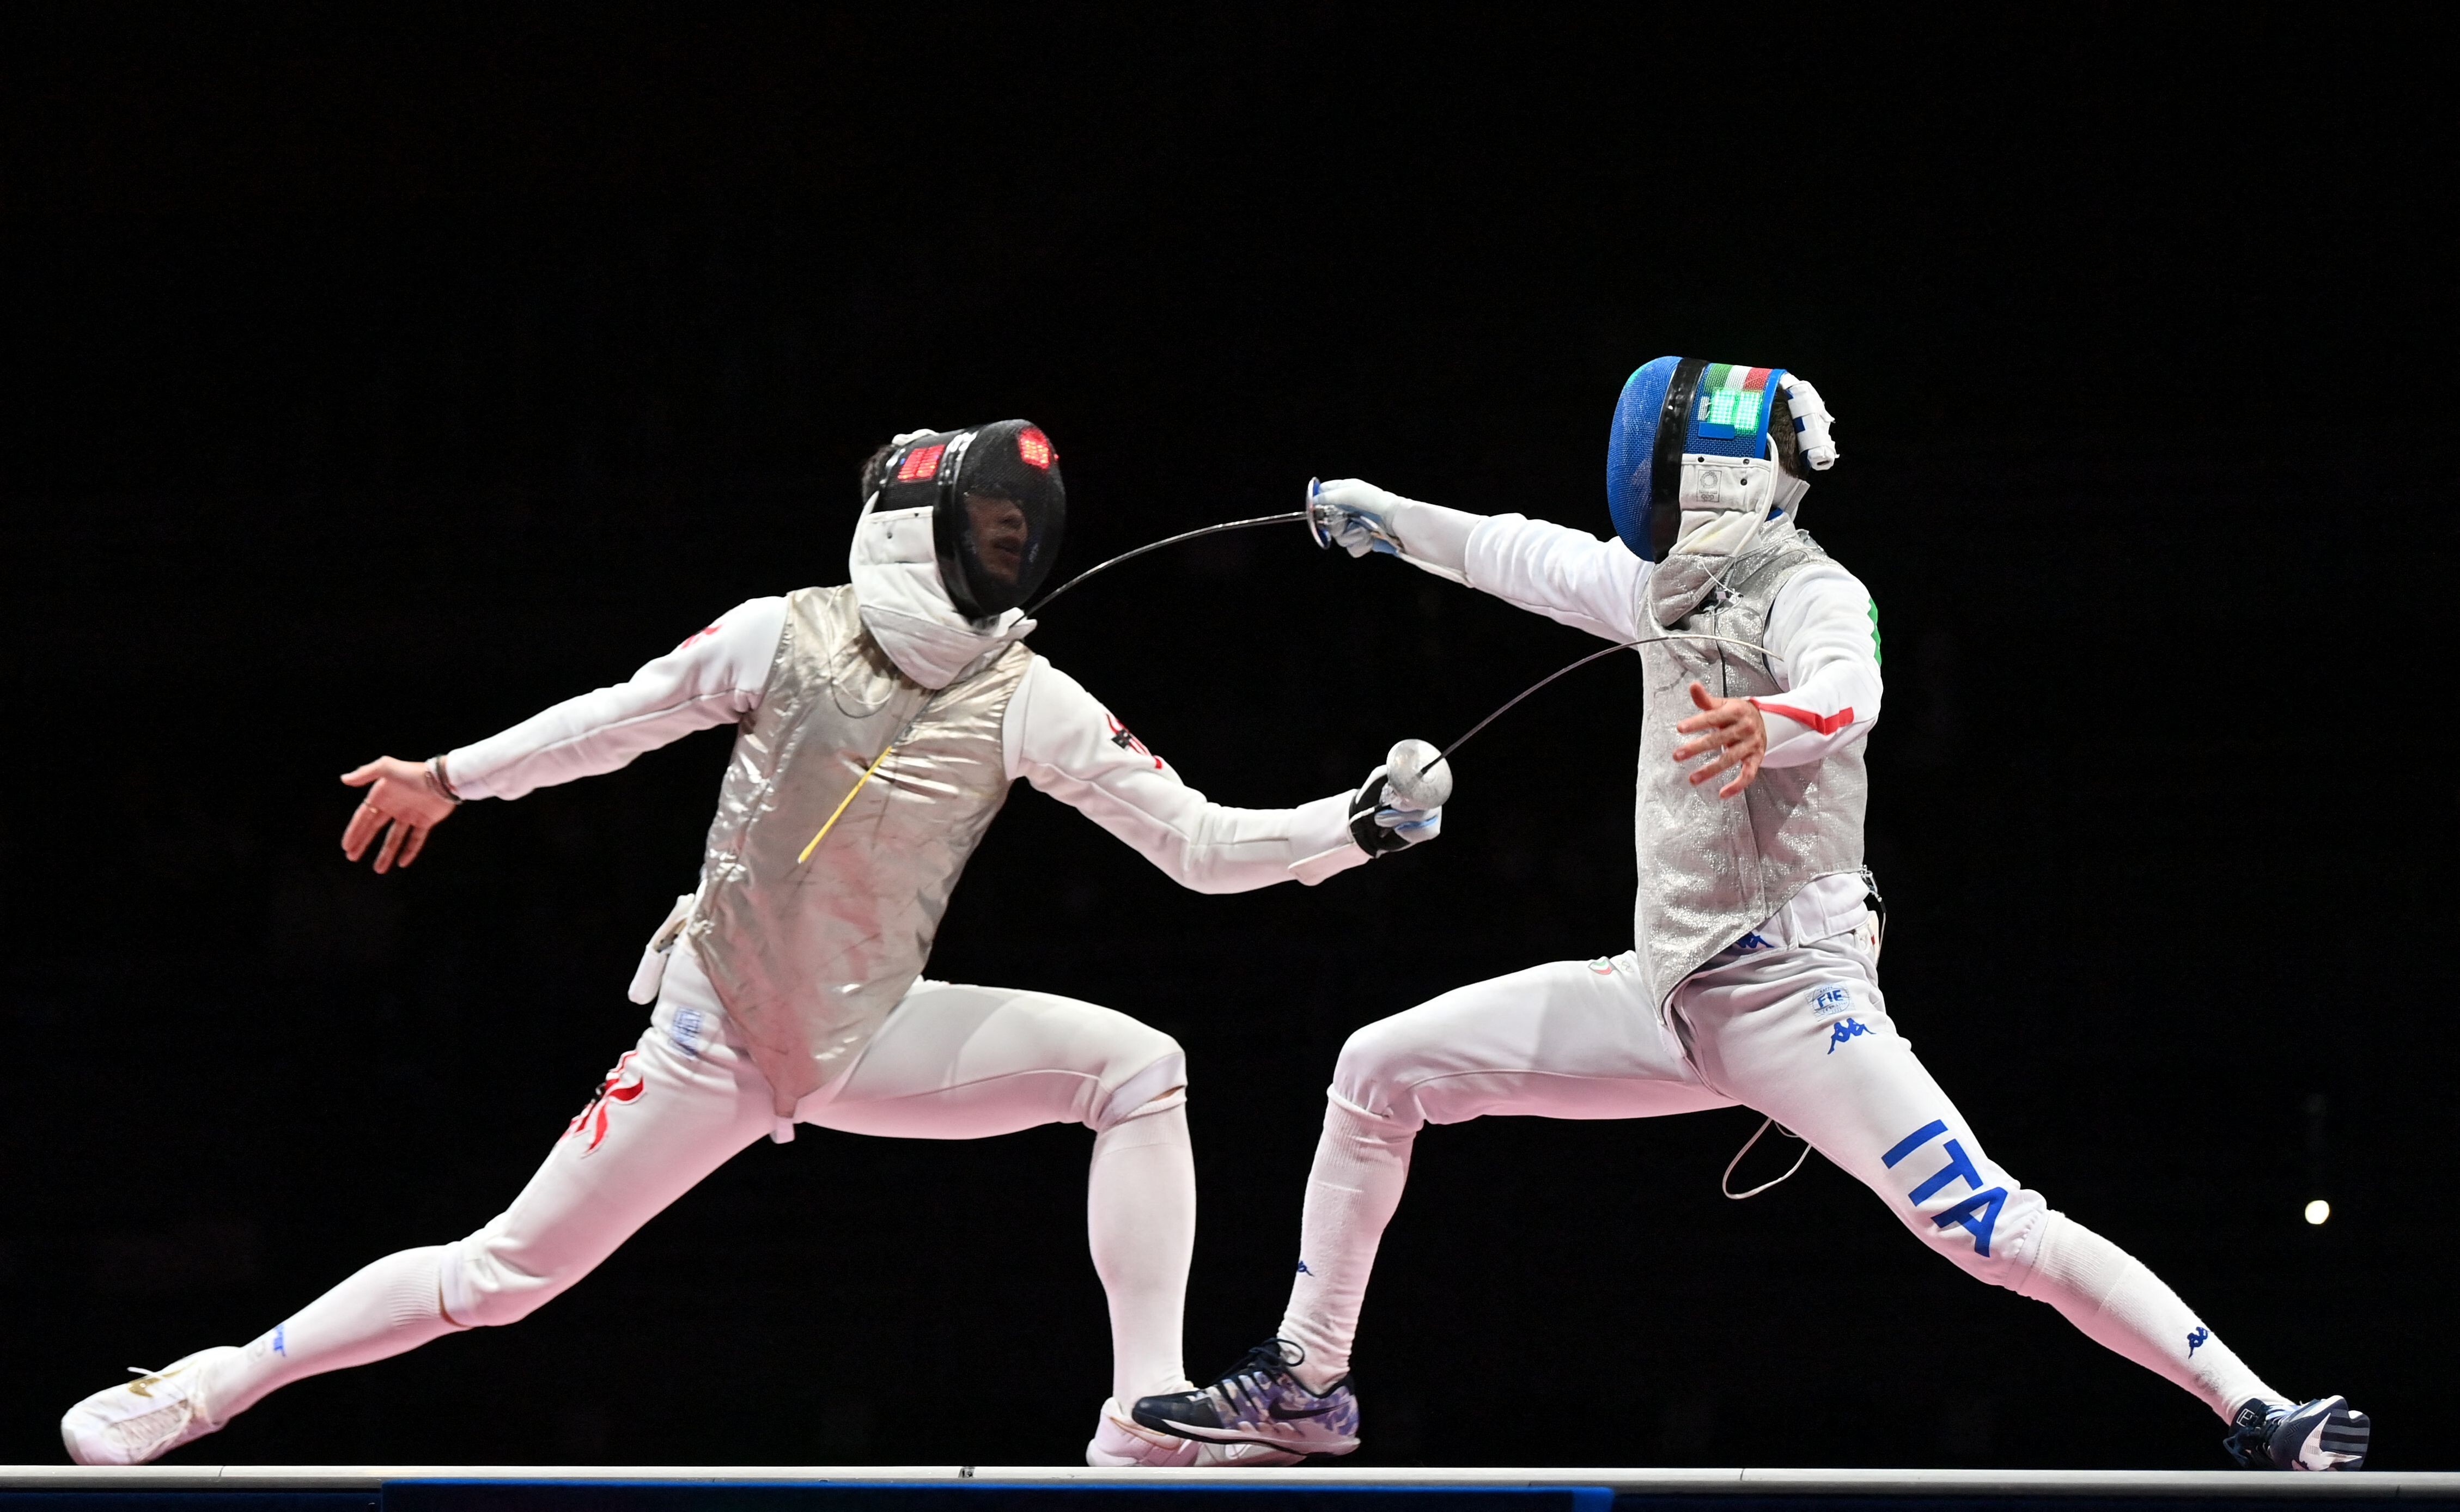 Hong Kong's Edgar Cheung Ka-long (L) competes against Italy's Daniele Garozzo in the men's individual foil gold medal bout during the Tokyo 2020 Olympic Games. Photo: AFP